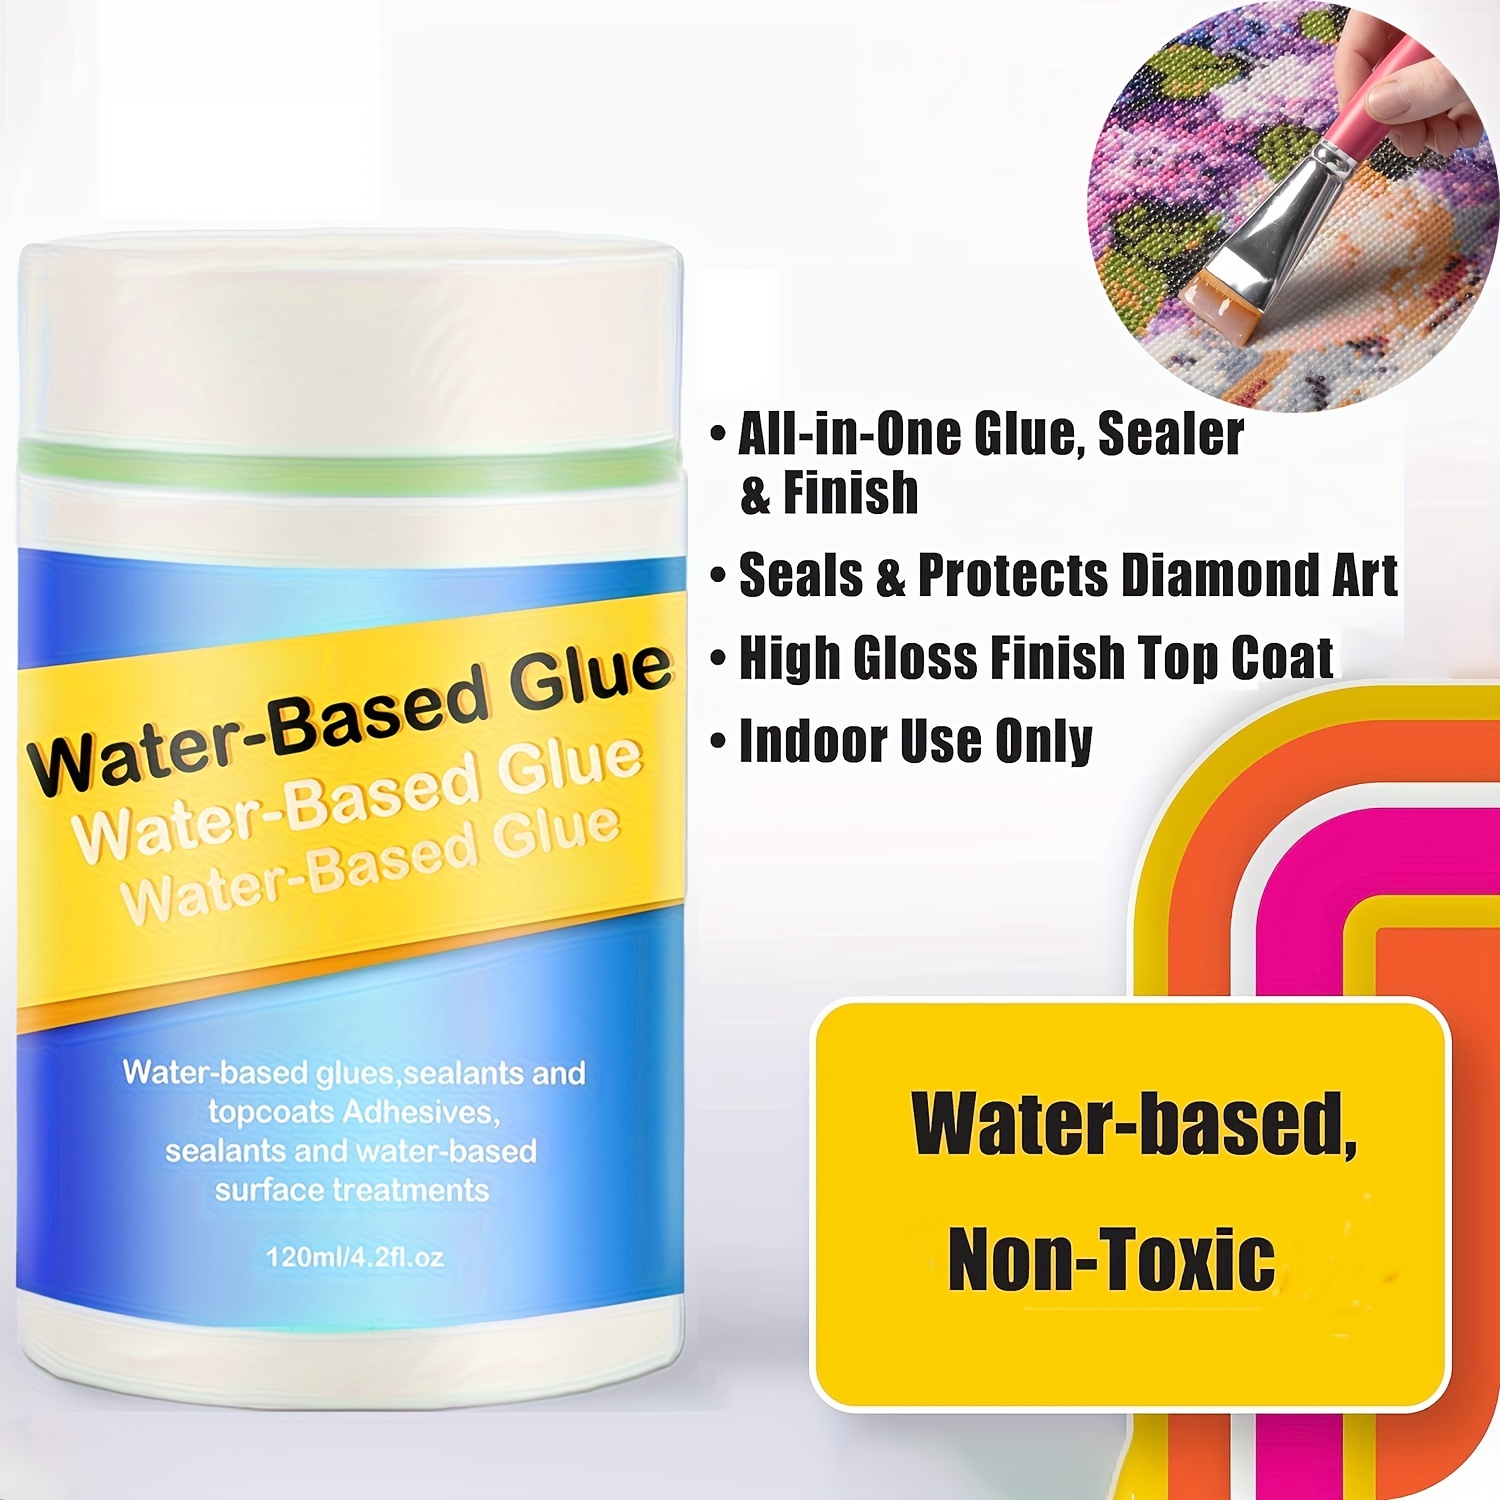 

shiny Finish" All-in-one Water-based Glue, Sealer & Finish - Perfect For Diy Crafts, Scrapbooking & Home Decor